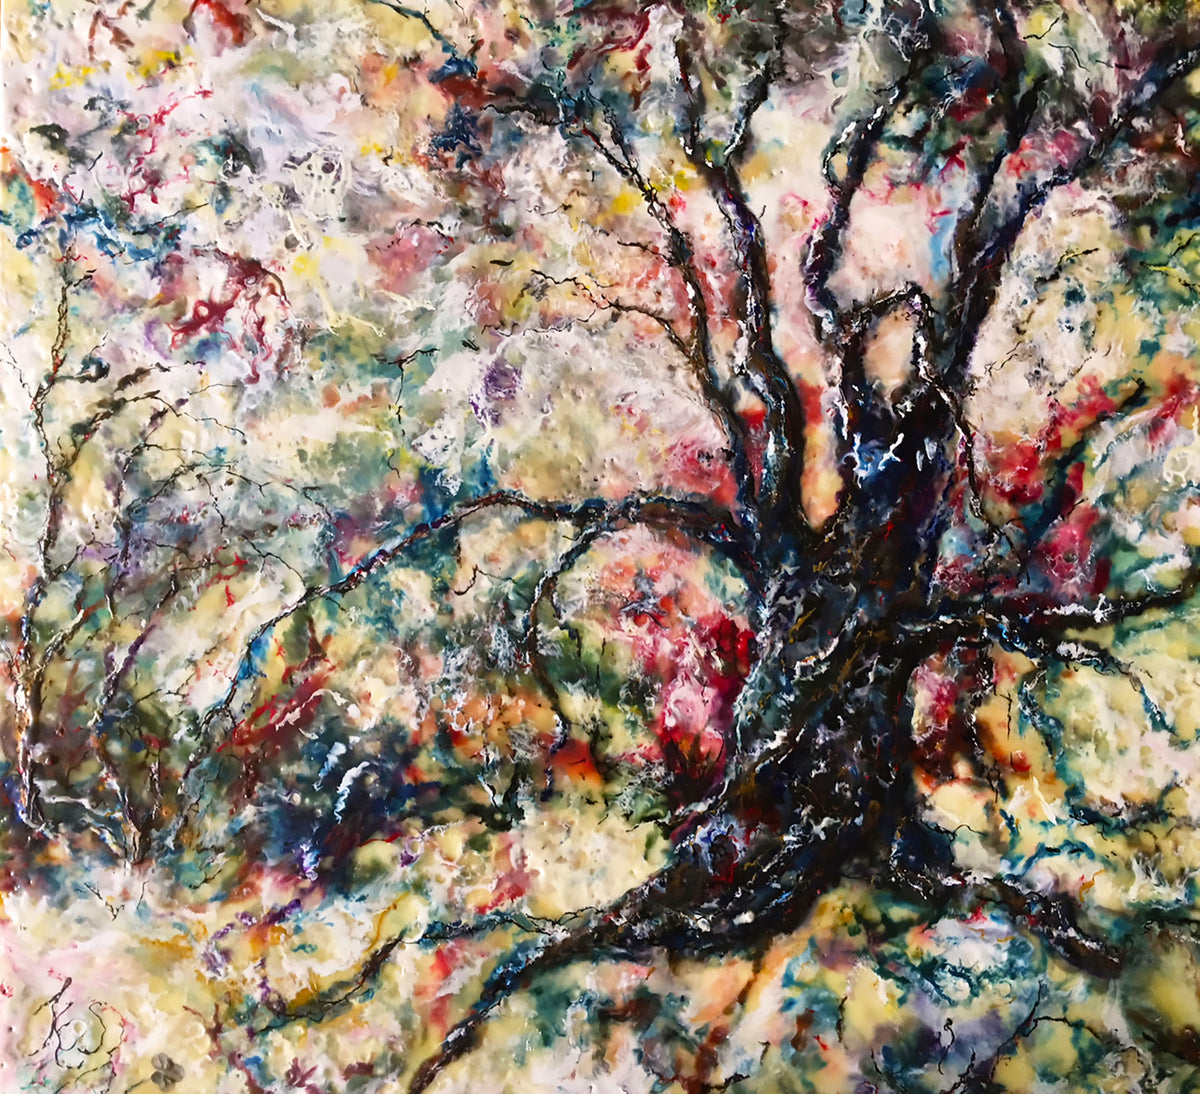 "Gnarled and Wizened" by J K (Karen) Phillips Sewell - Fine Art Reproductions